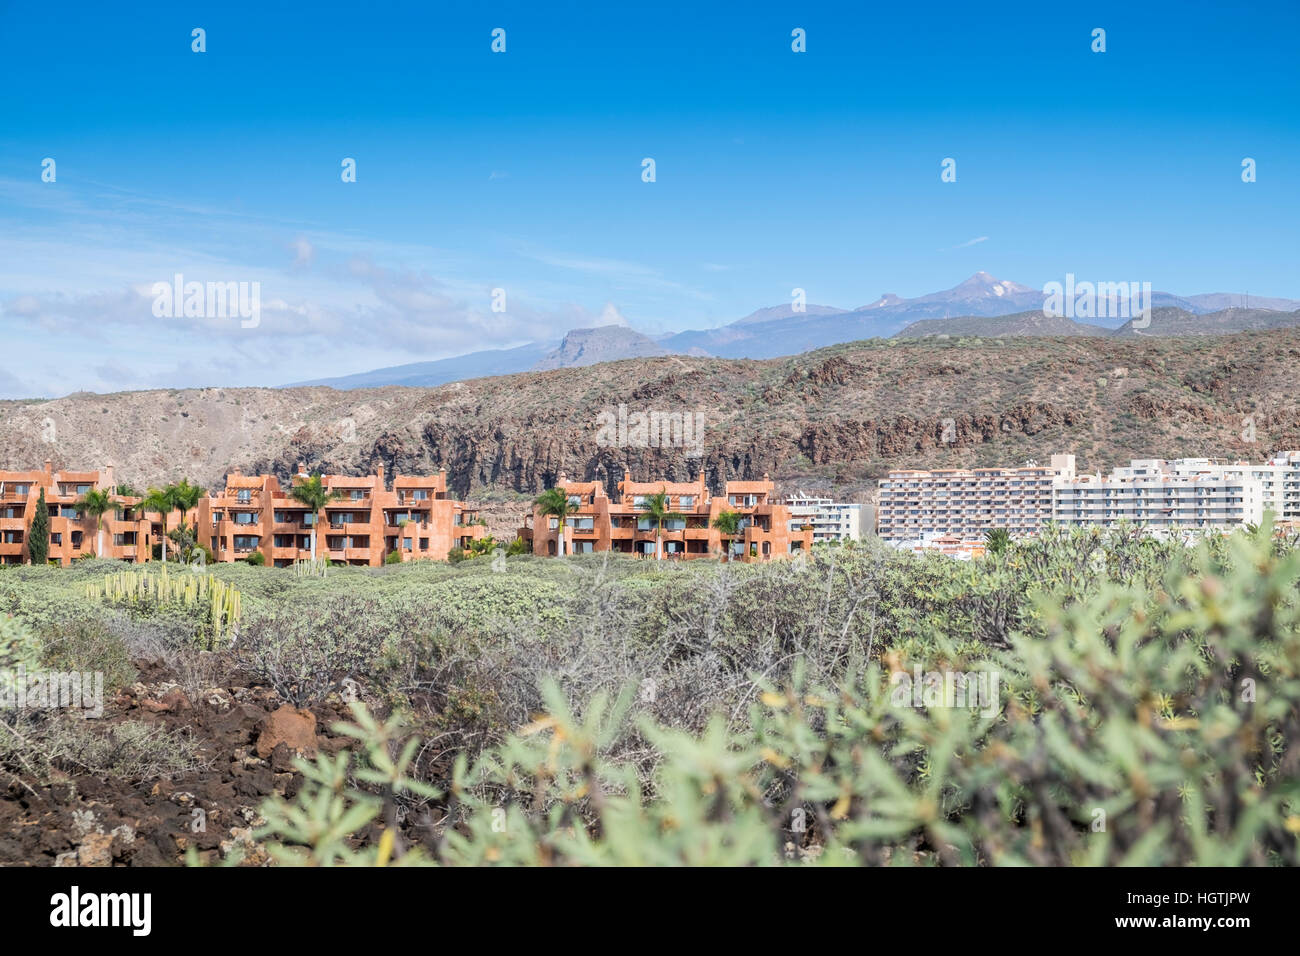 El Palm Mar urbanization at the base of Guaza mountain next to the coast in Tenerife, Canary Islands, Spain Stock Photo